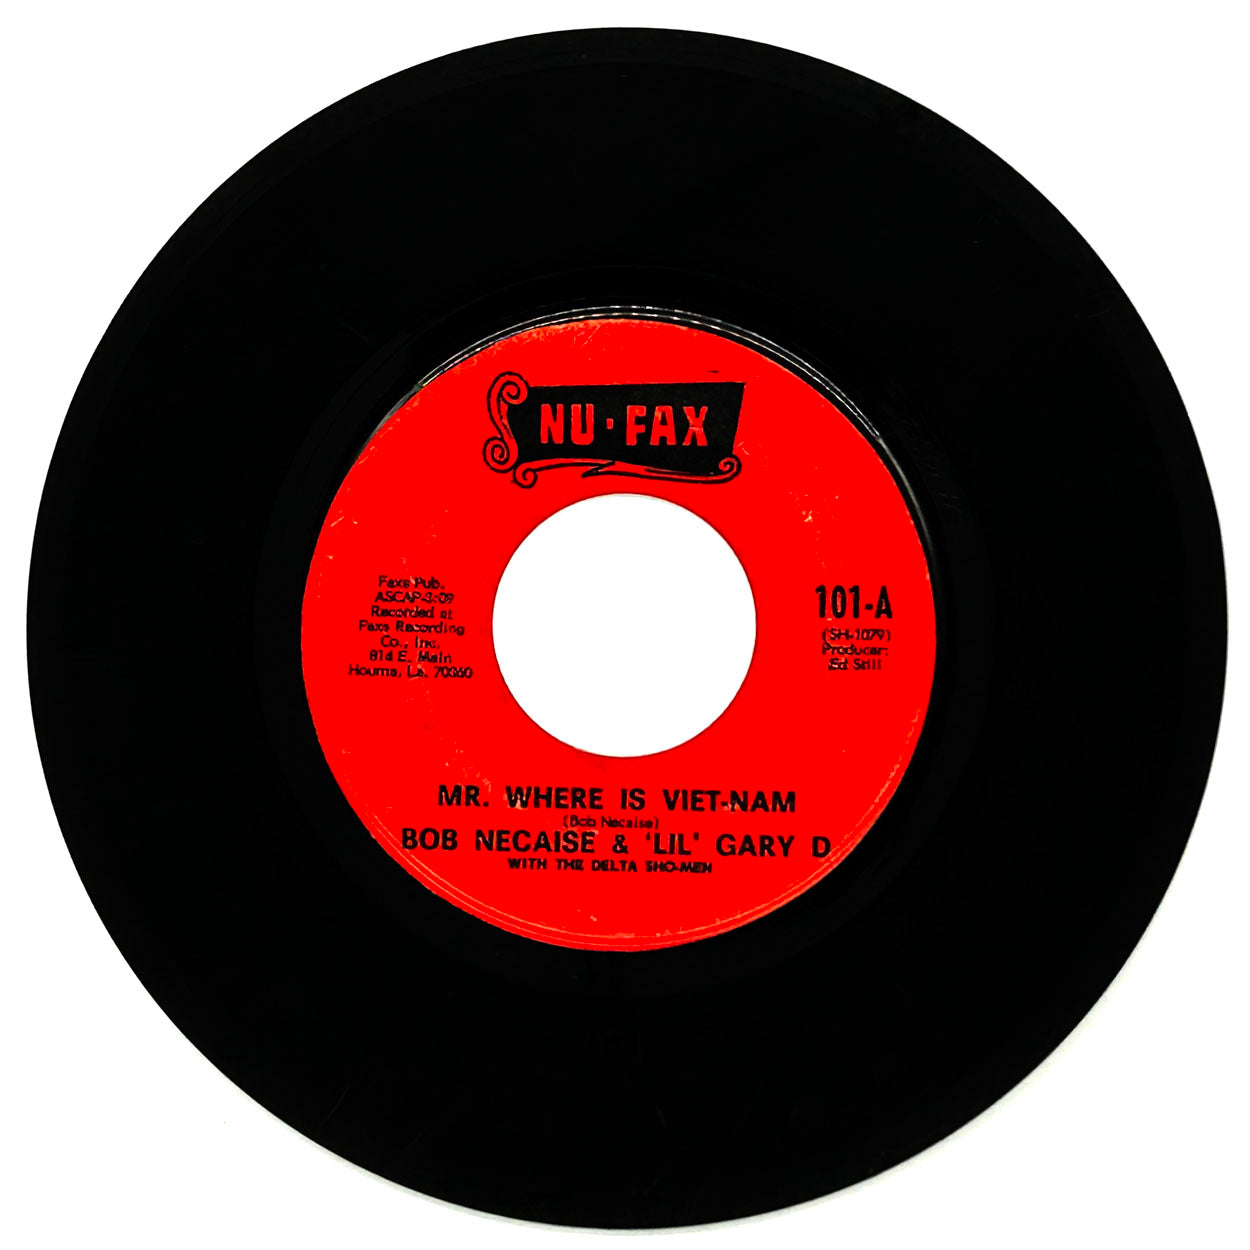 Bob Necaise & 'Lil' Gary D with The Delta Sho-Men: MR. WHERE IS VIET-NAM/ Bob Necaise with The Delta Sho-Men : THIS LIFE THAT I'M LIVING CAN'T GO ON